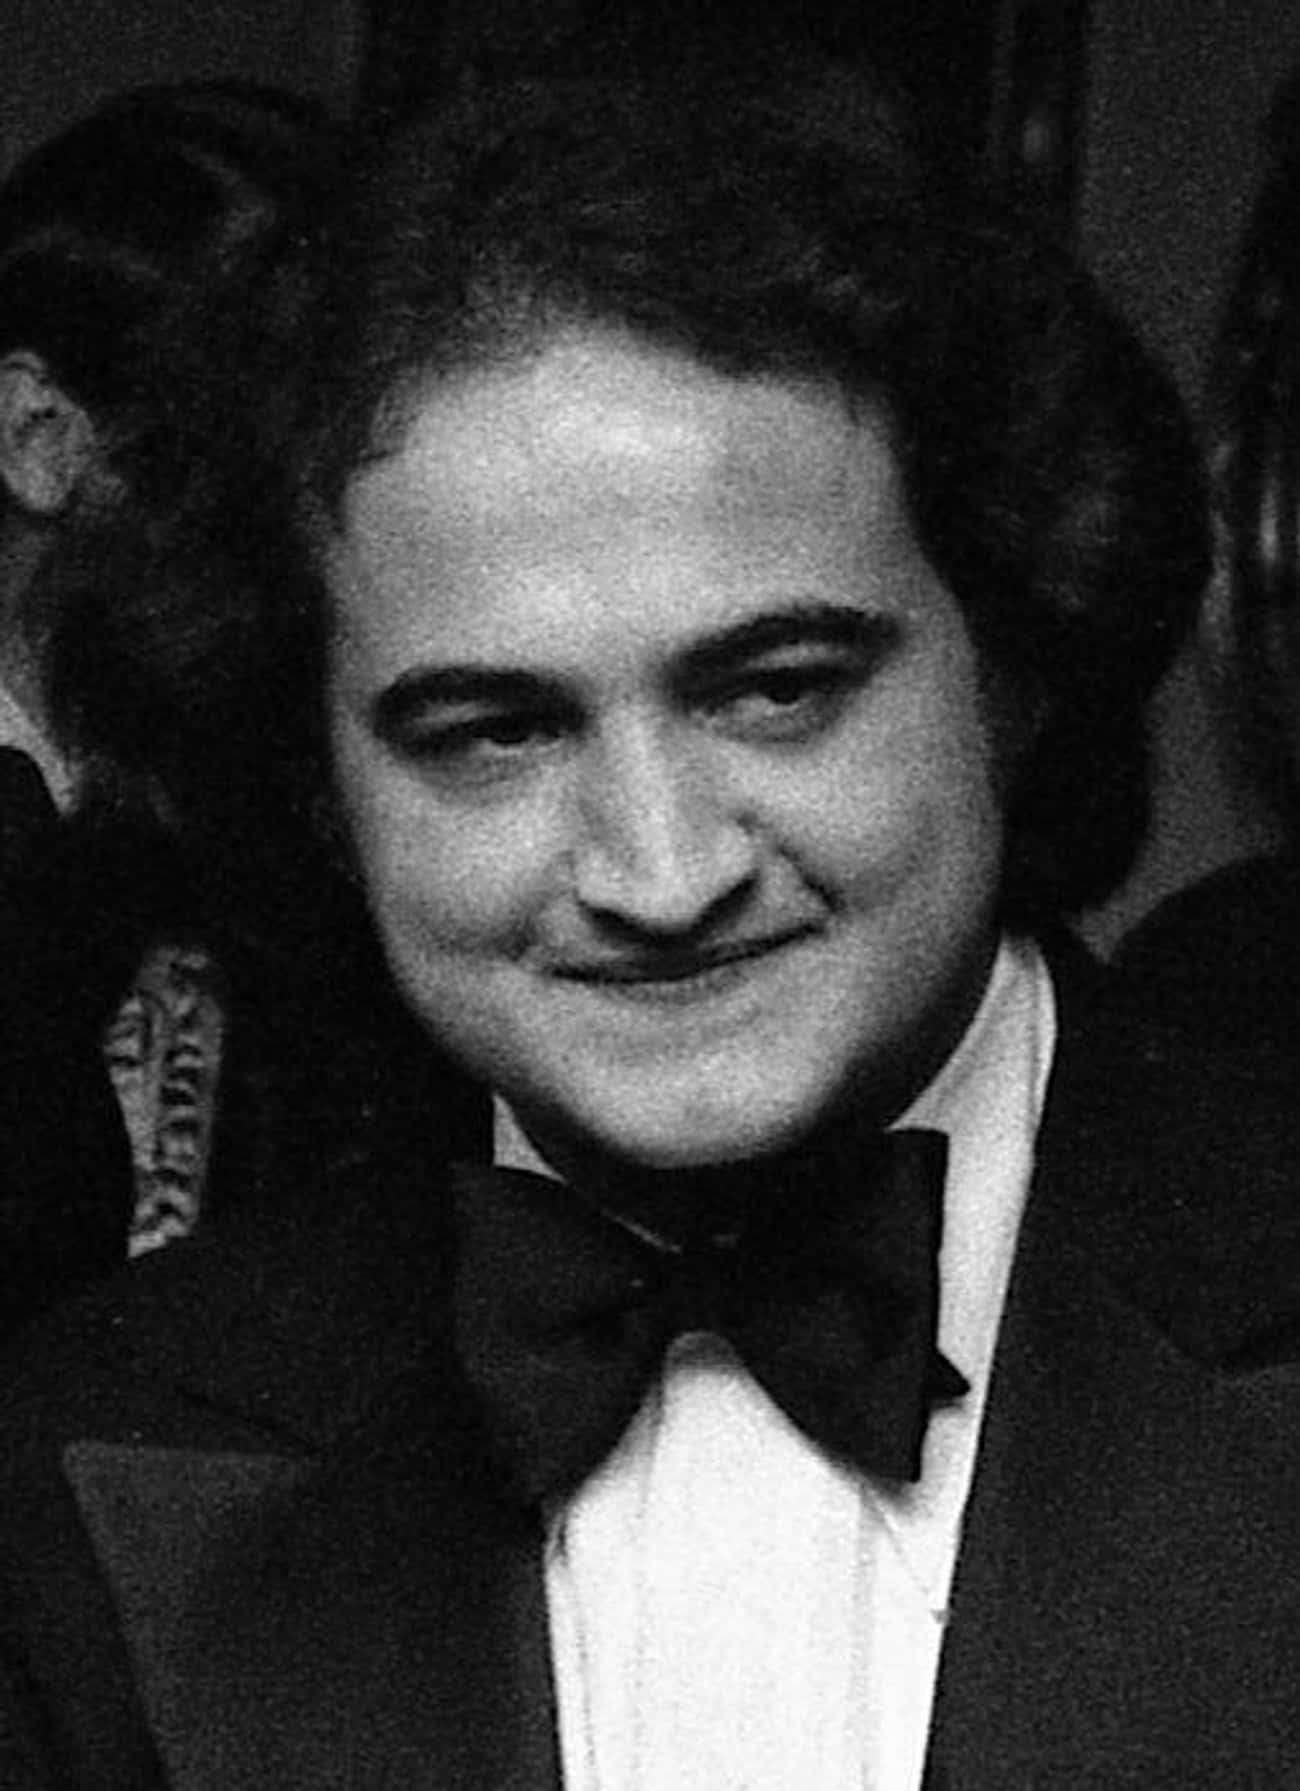 John Belushi Passed In His Favorite Bungalow At The Chateau Marmont Hotel